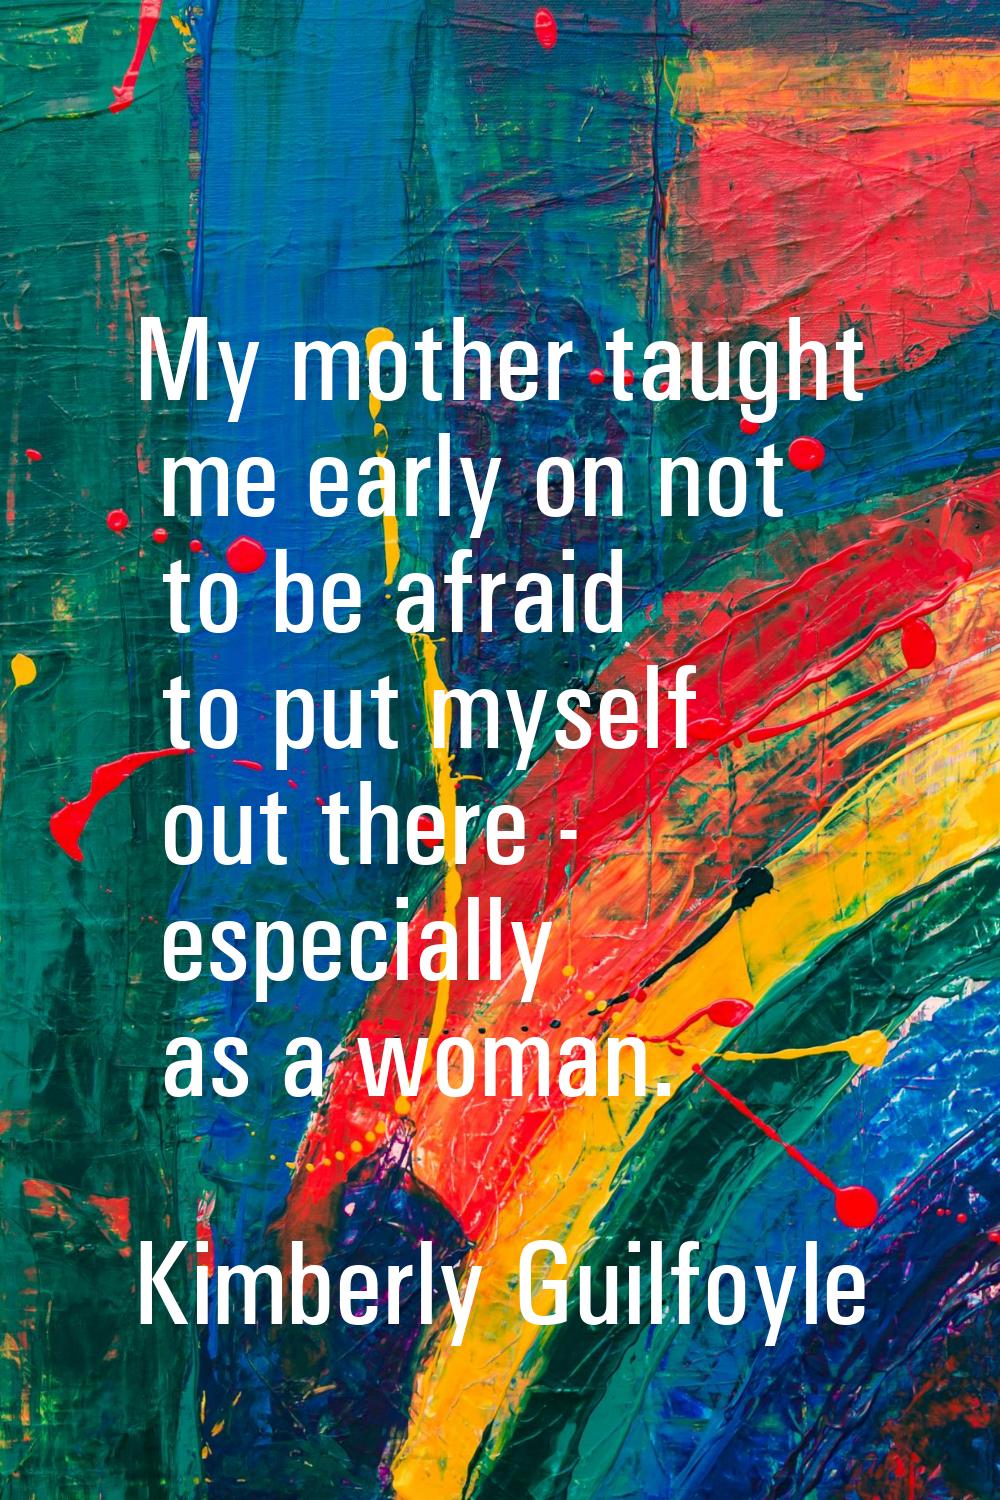 My mother taught me early on not to be afraid to put myself out there - especially as a woman.